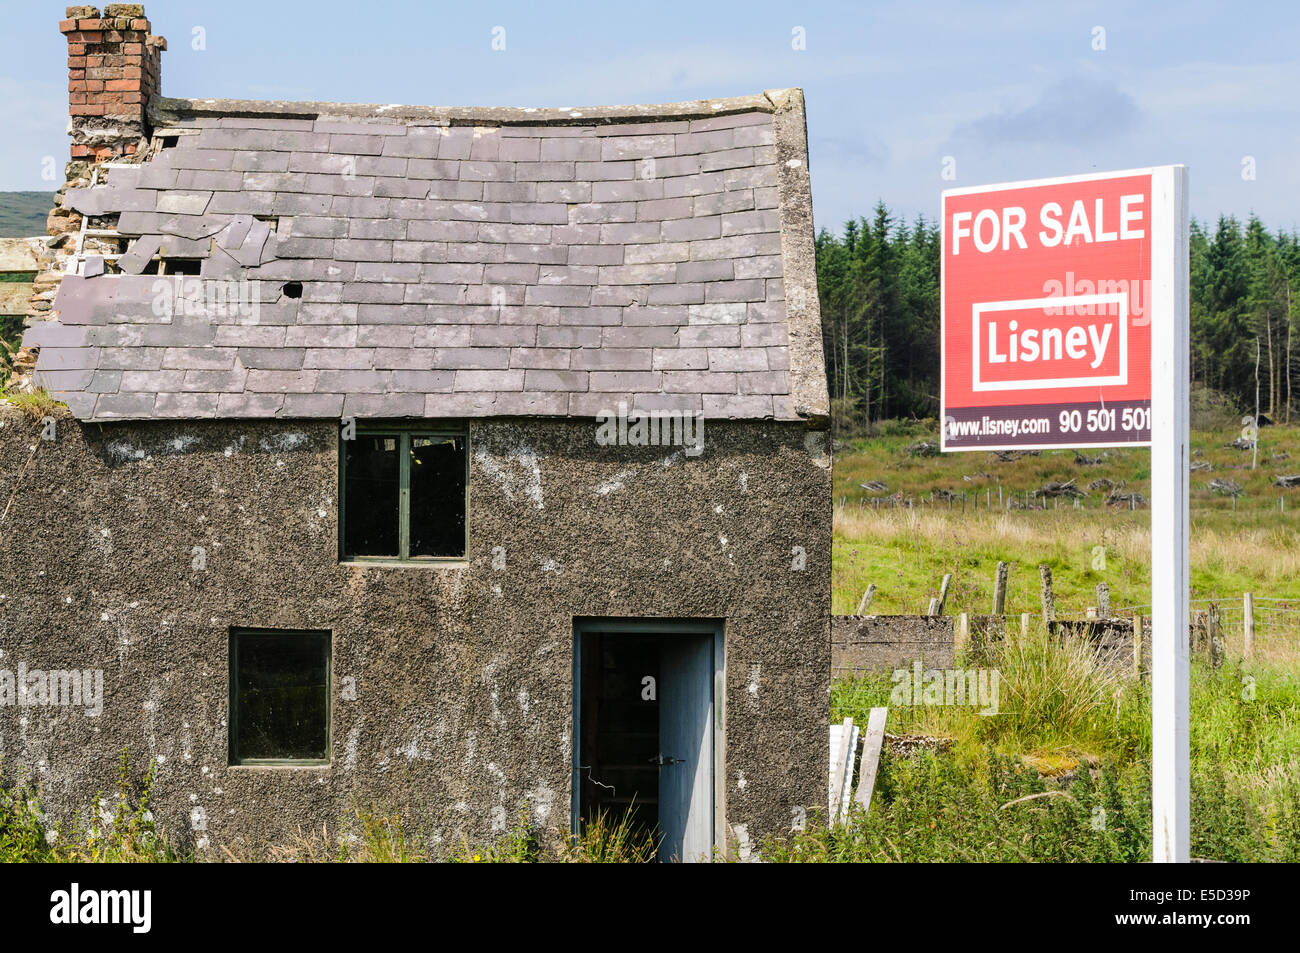 Derelict house in a rural situation with "For Sale" sign Stock Photo